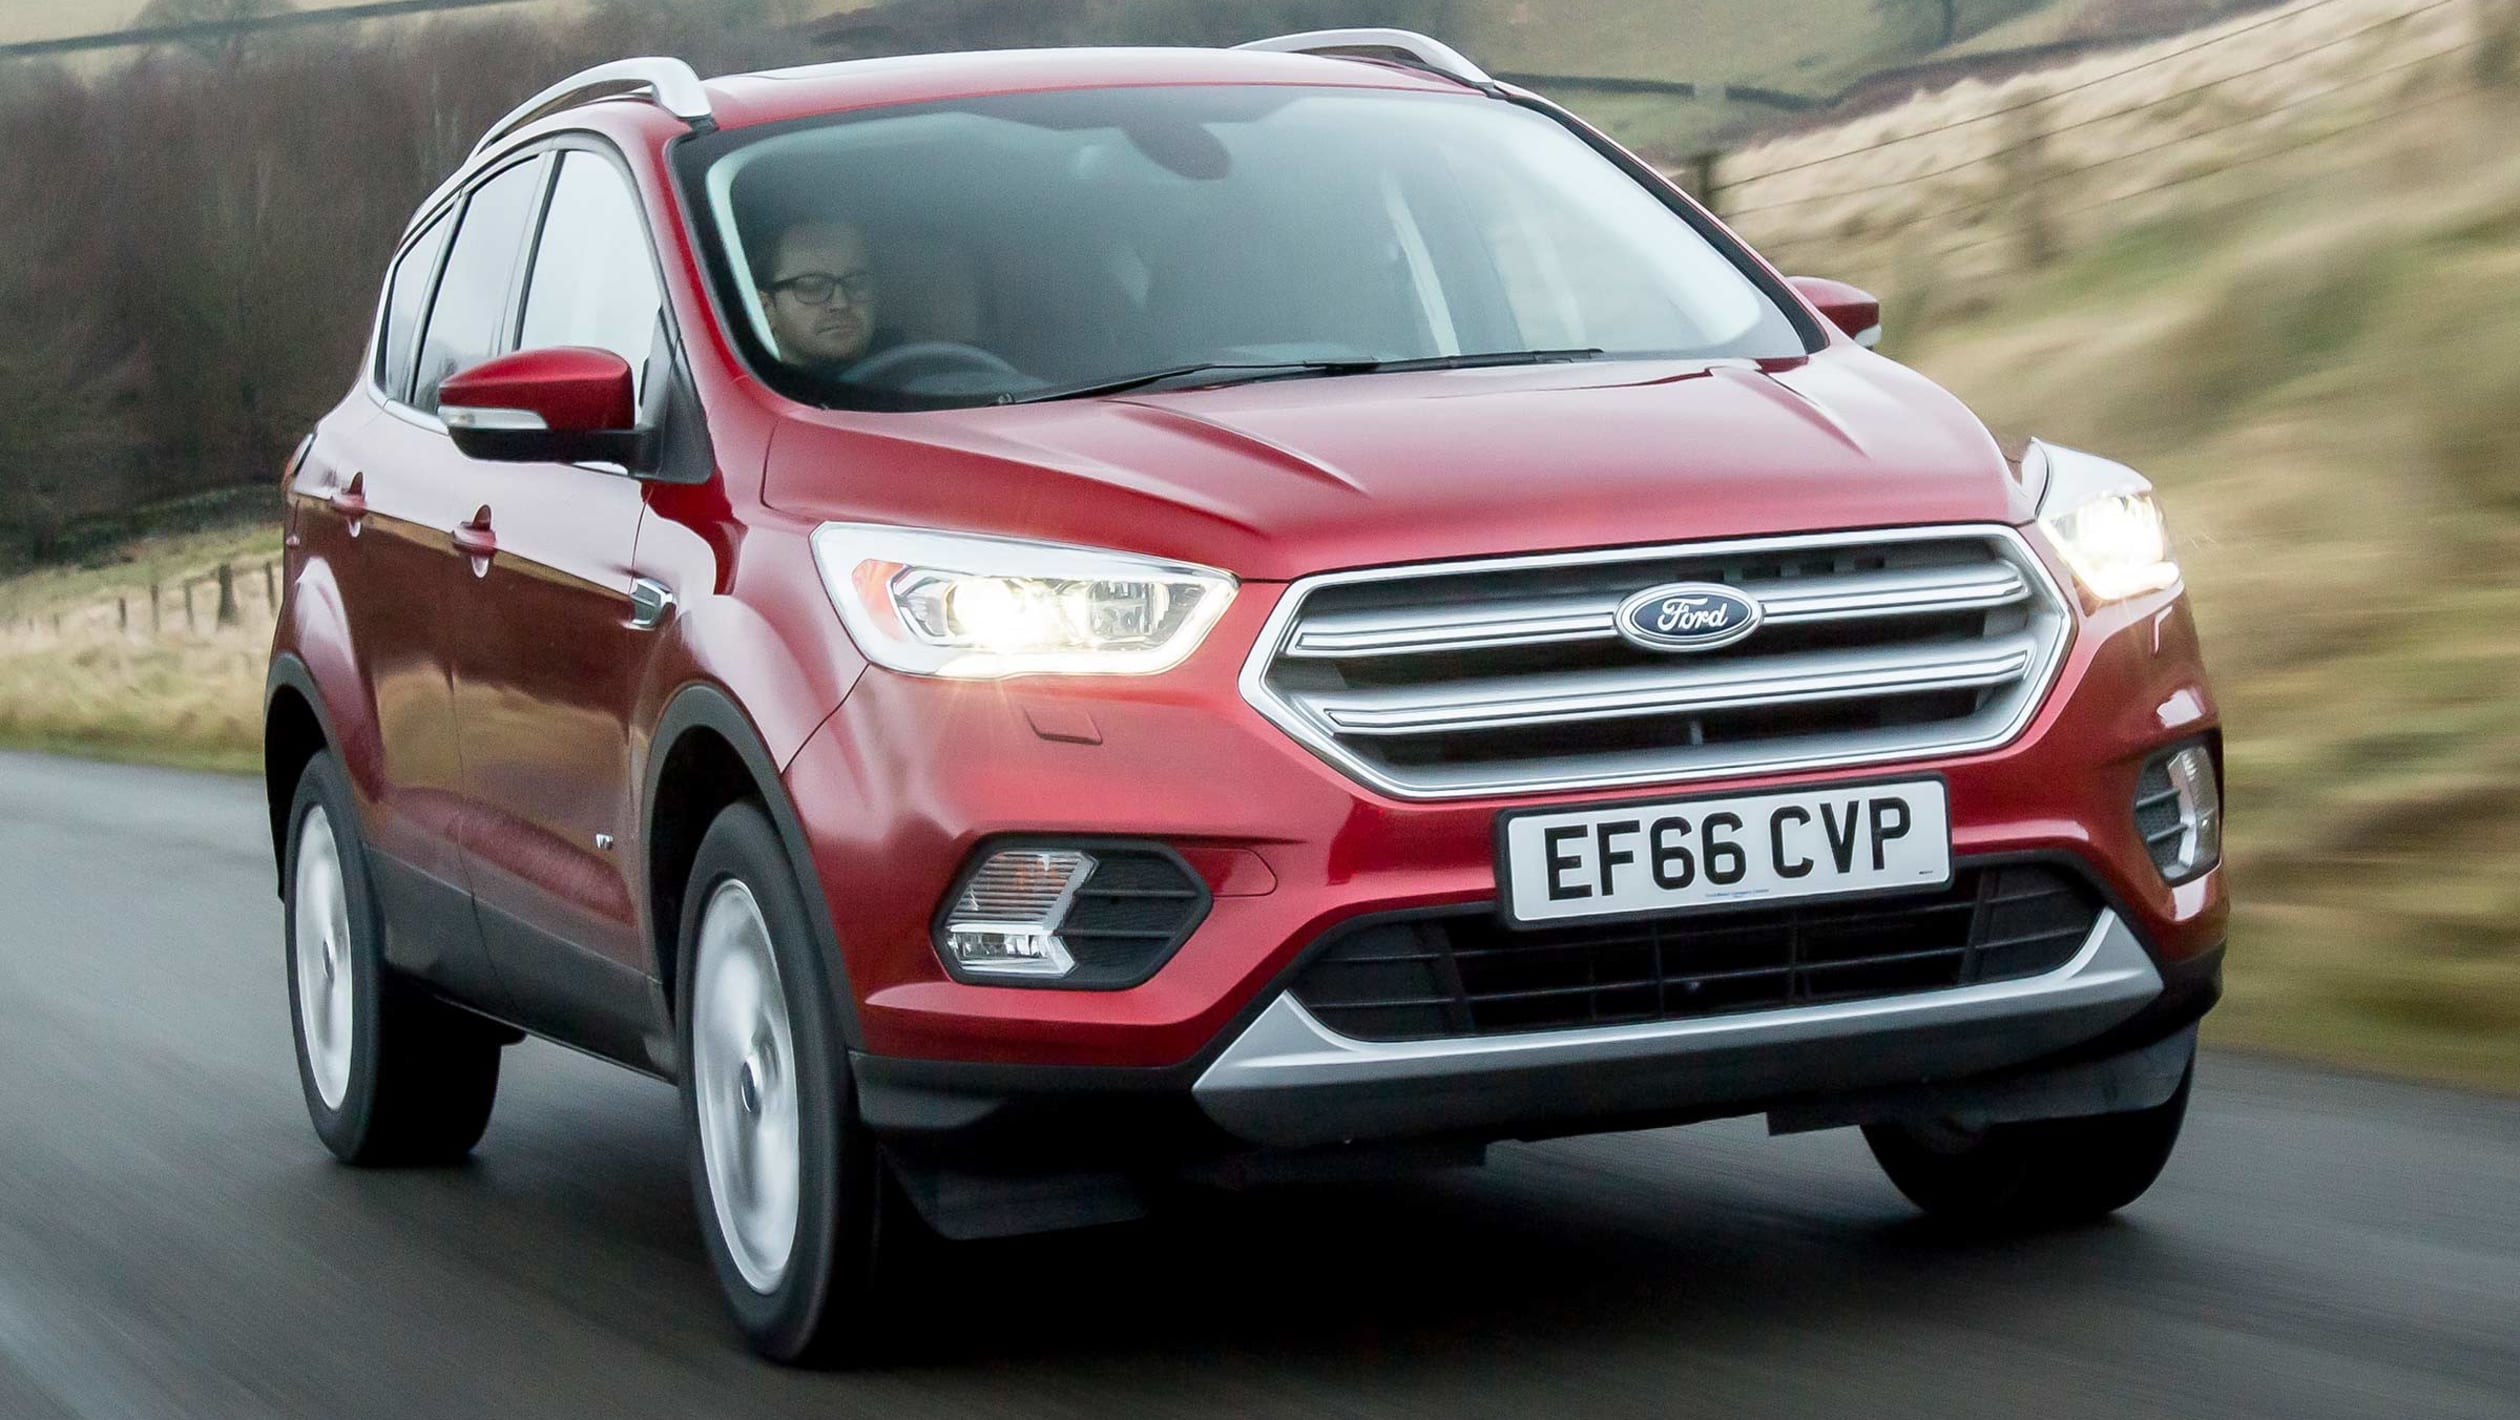 New Ford Kuga 2017 review - pictures | Auto Express